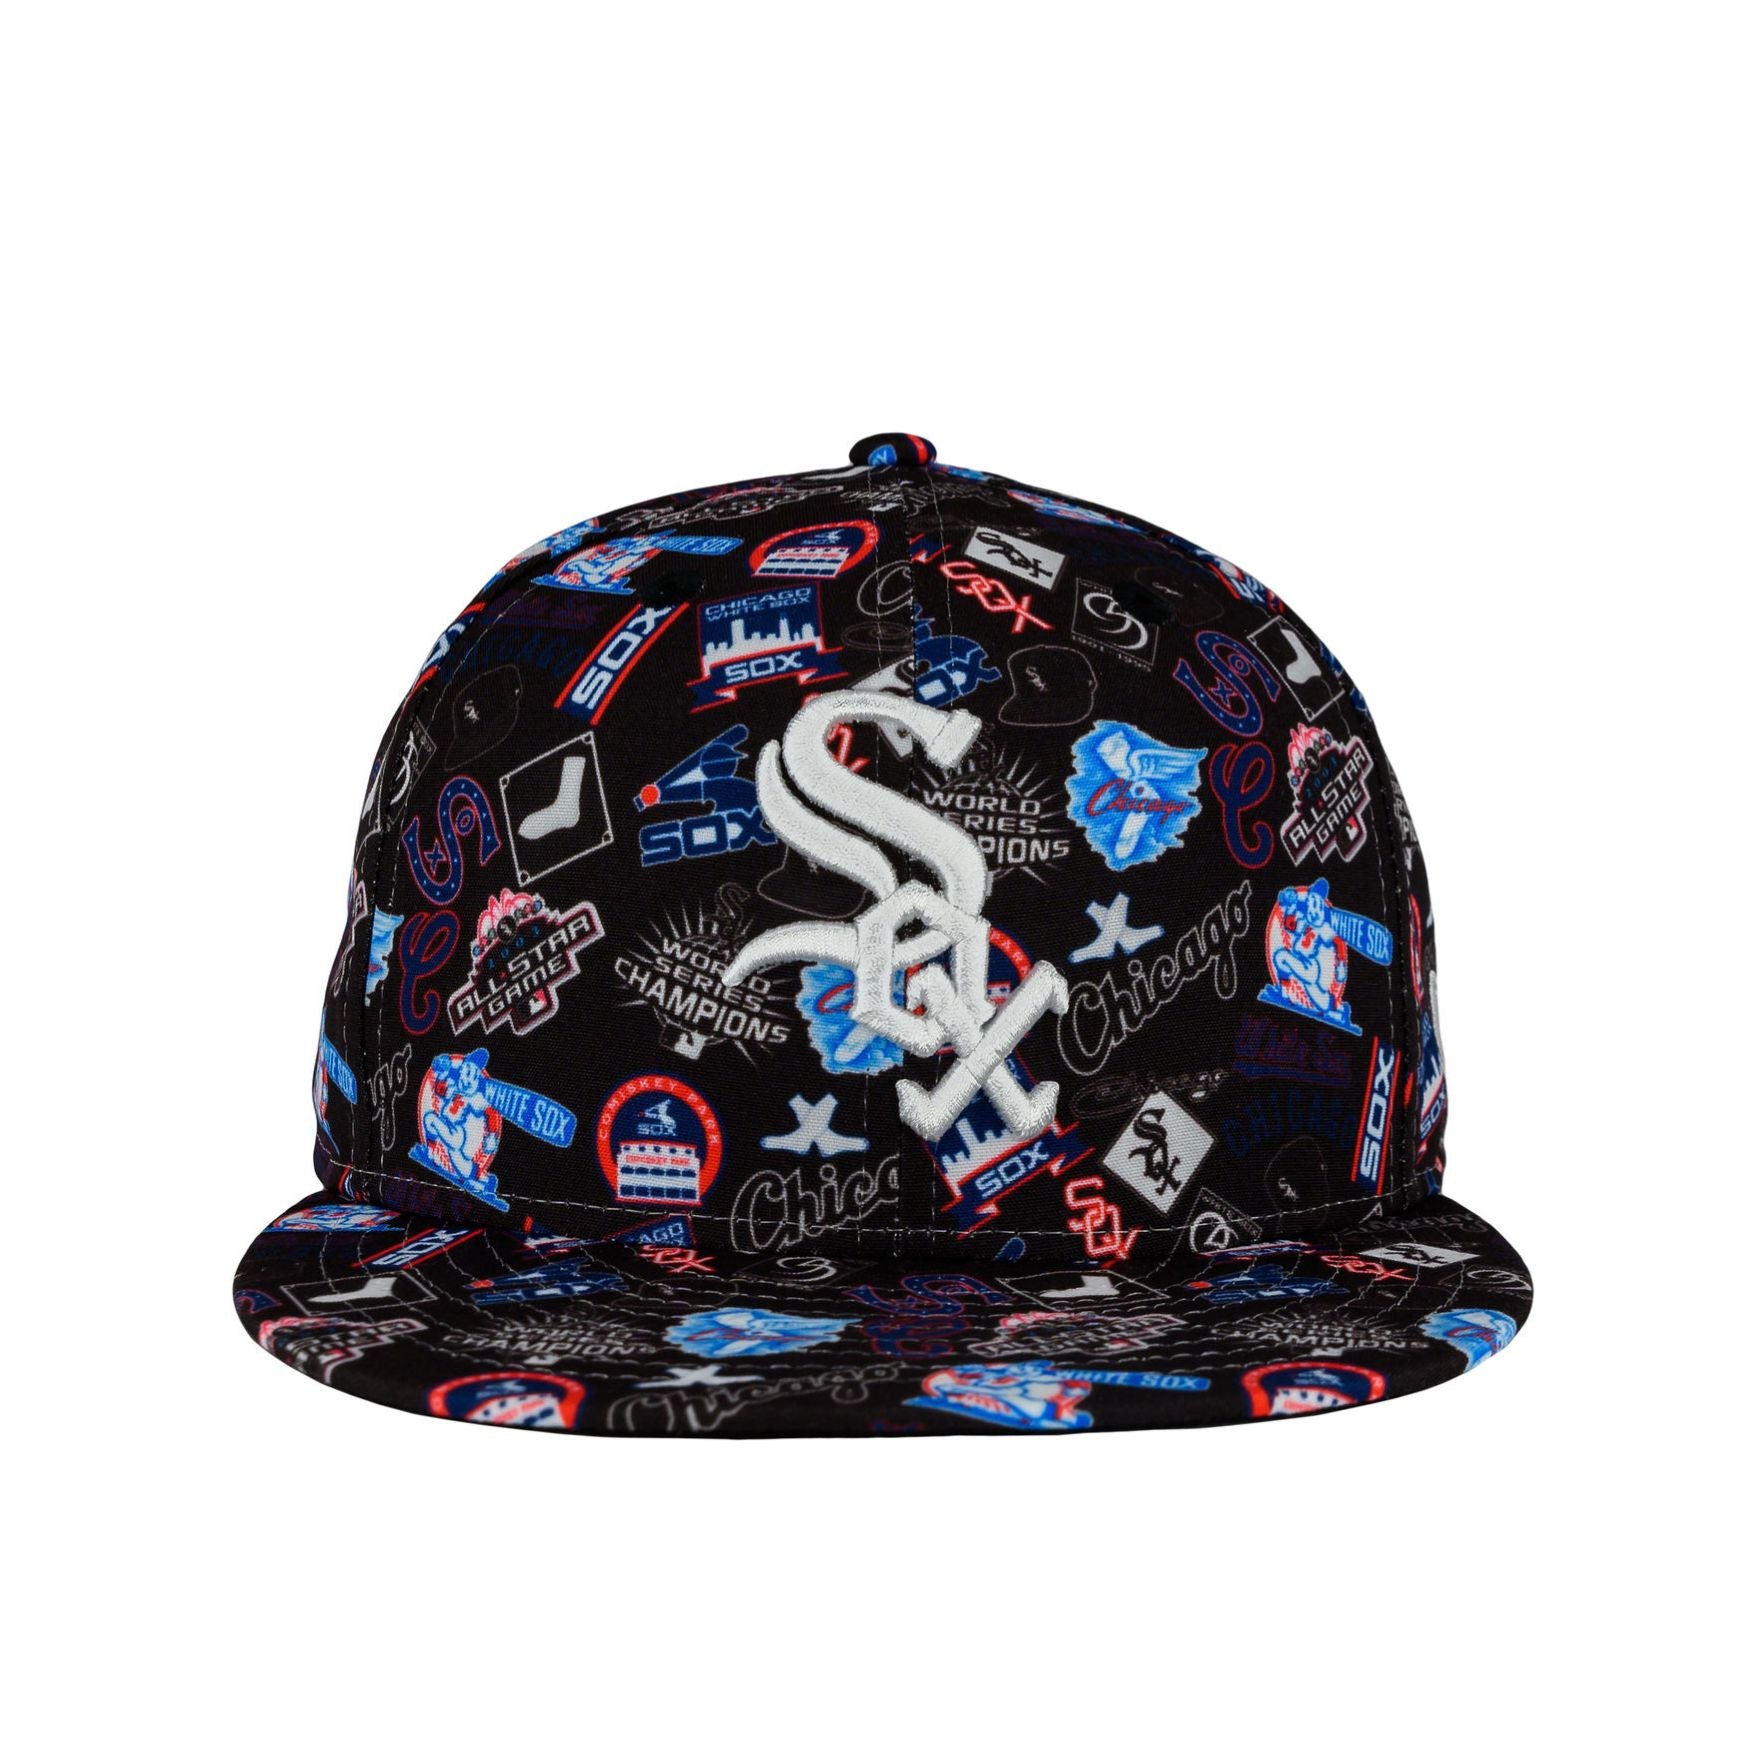 Chicago White Sox Cooperstown 1912 Chrome New Era 9FIFTY Snapback  Adjustable Hat